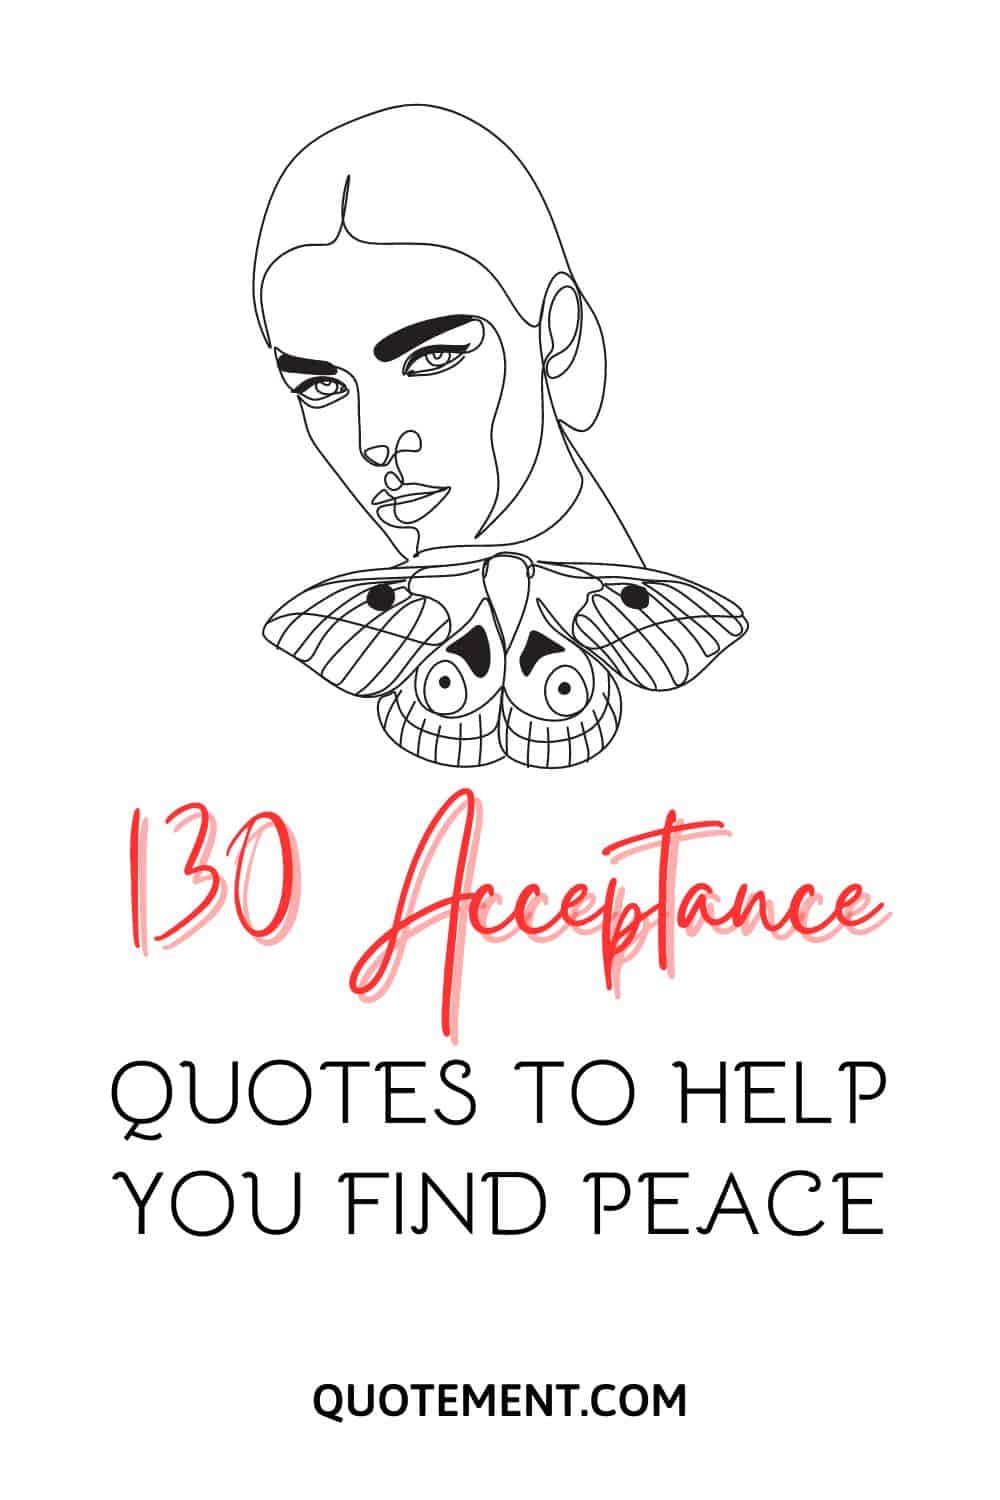 130 Wise Acceptance Quotes To Help You Grow And Prosper
